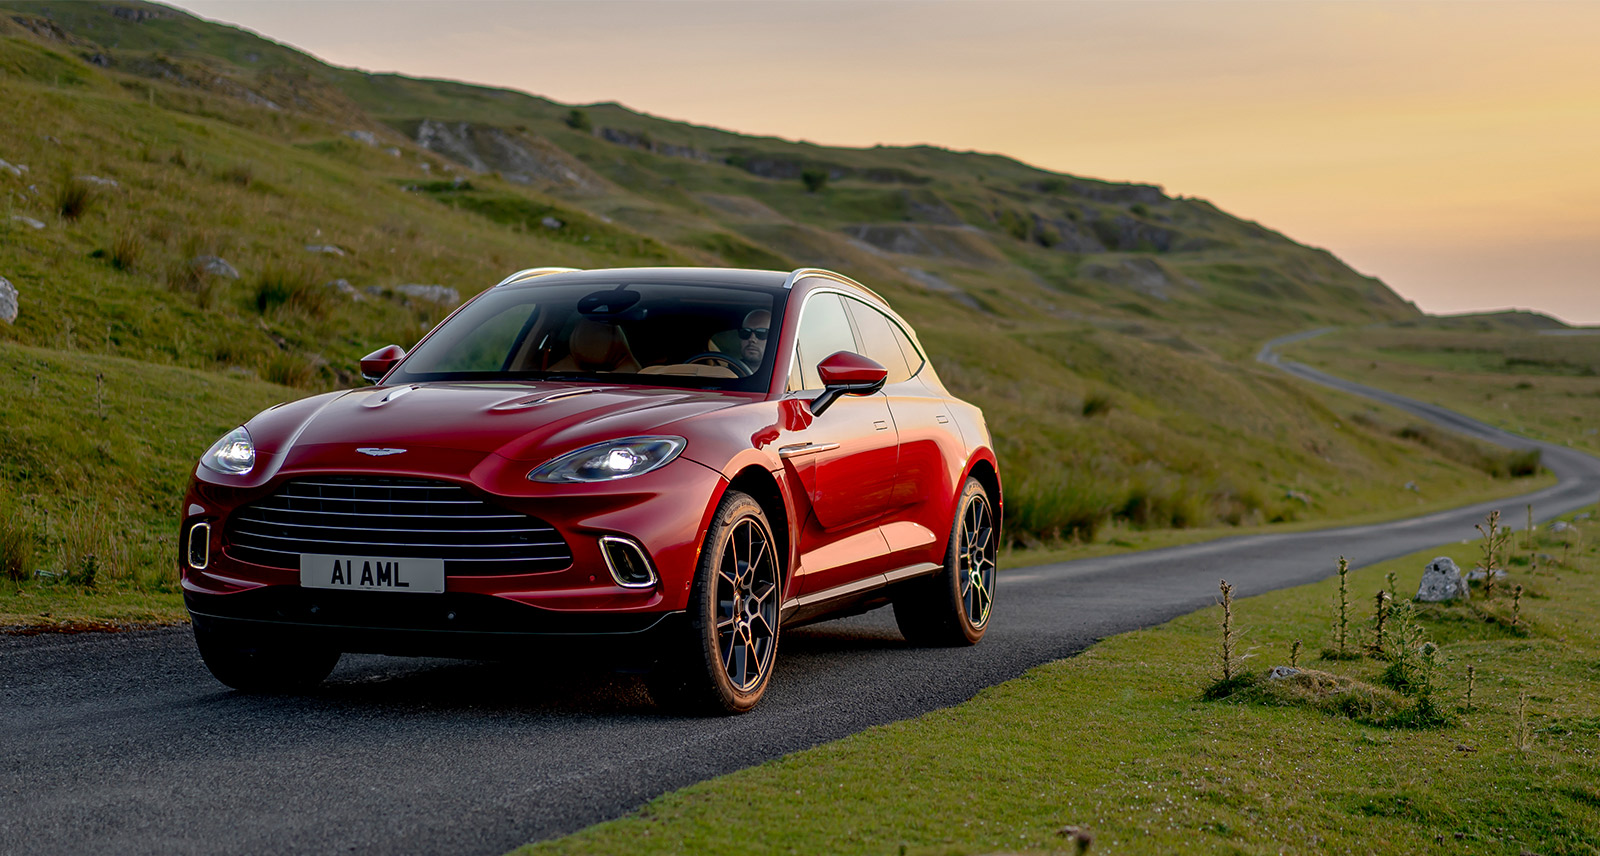 5 Reasons Why the Aston Martin DBX is Summer's Hottest SUV